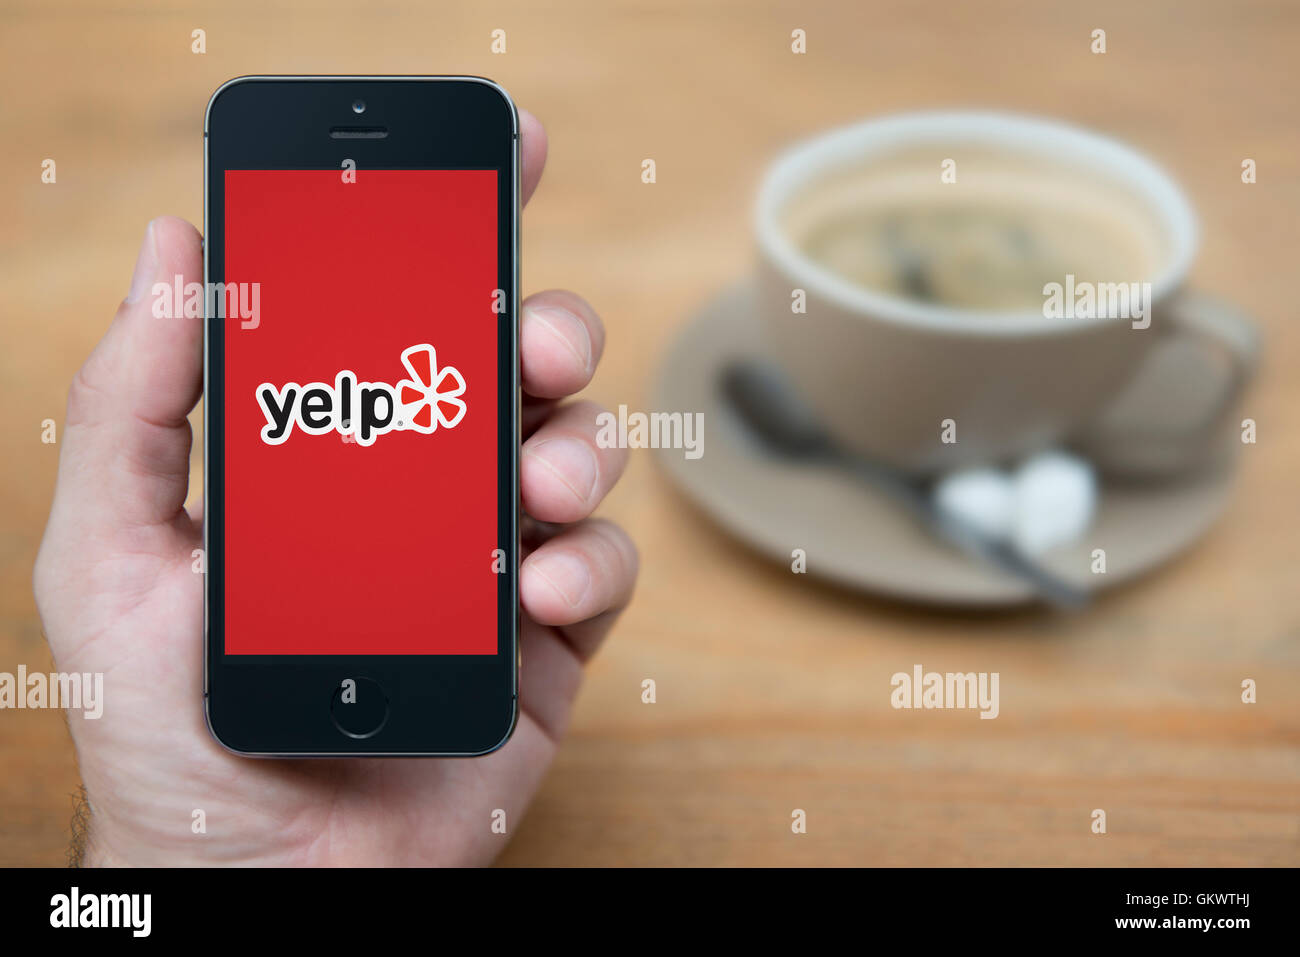 A man looks at his iPhone which displays the Yelp logo, while sat with a cup of coffee (Editorial use only). Stock Photo